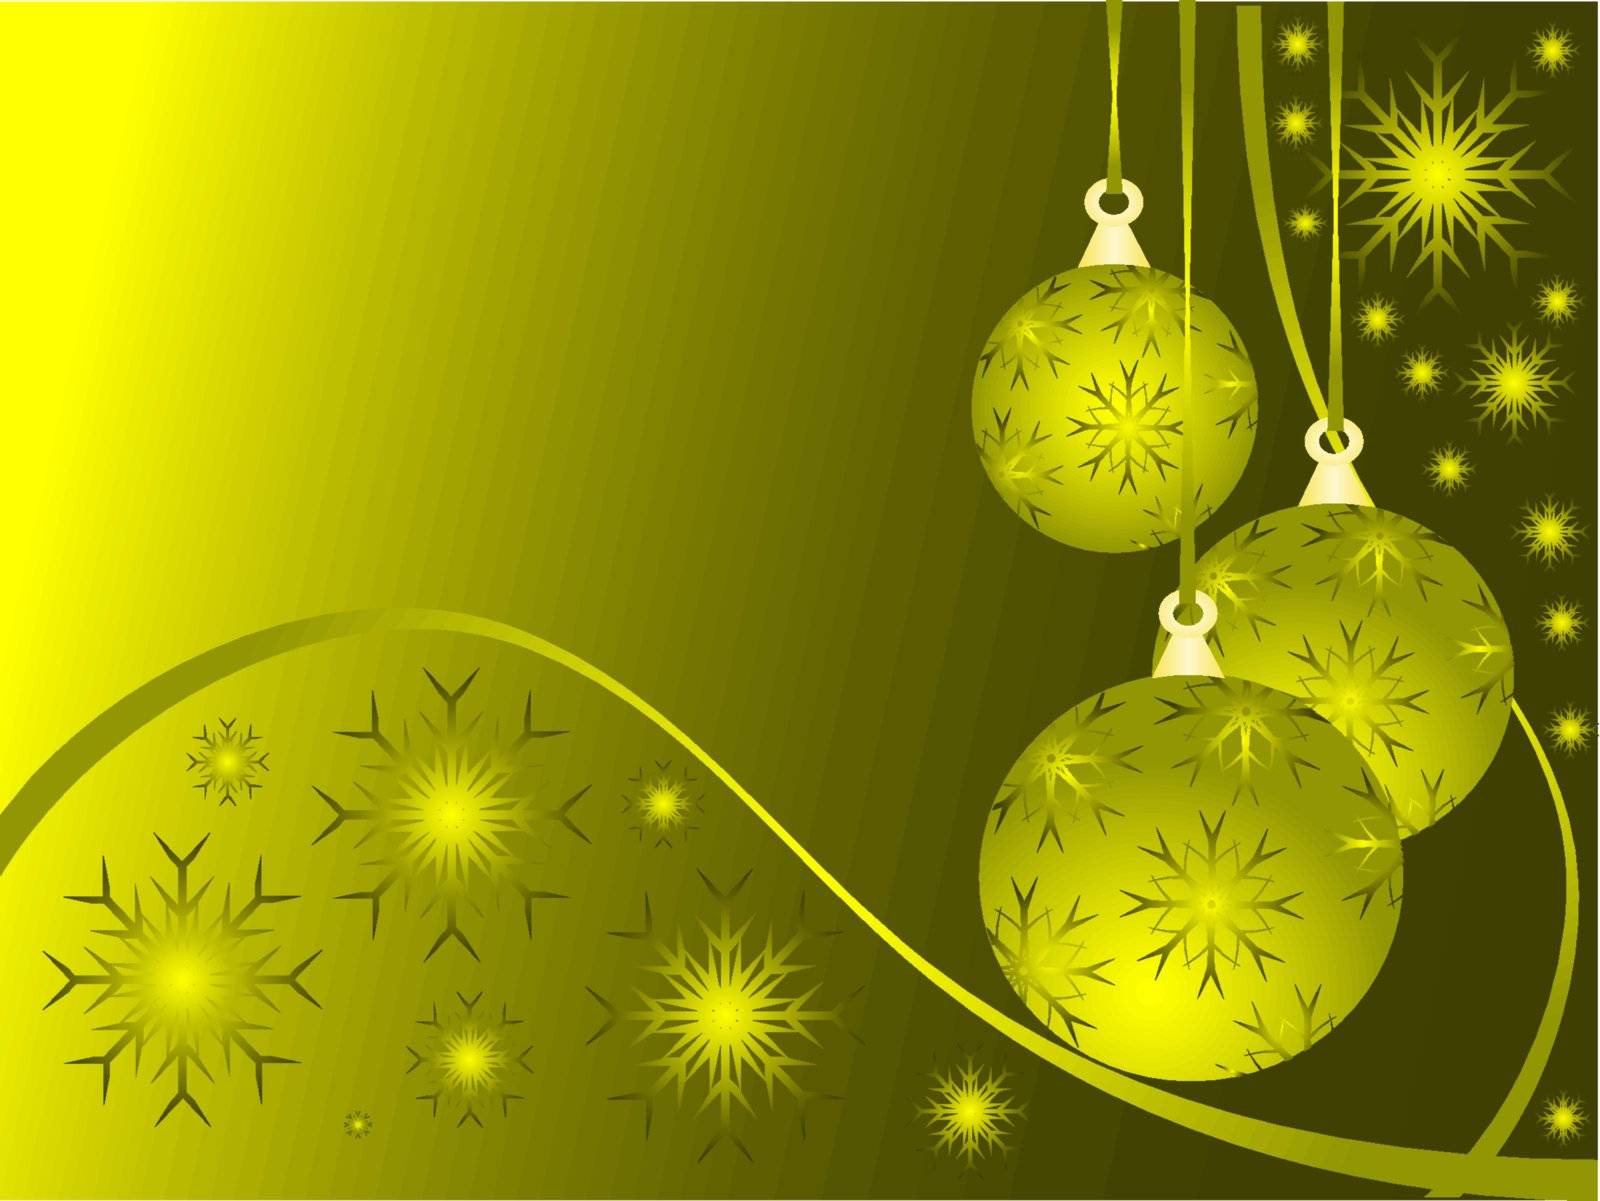 An abstract Christmas vector illustration with gold baubles on a darker backdrop with snowflakes and room for text